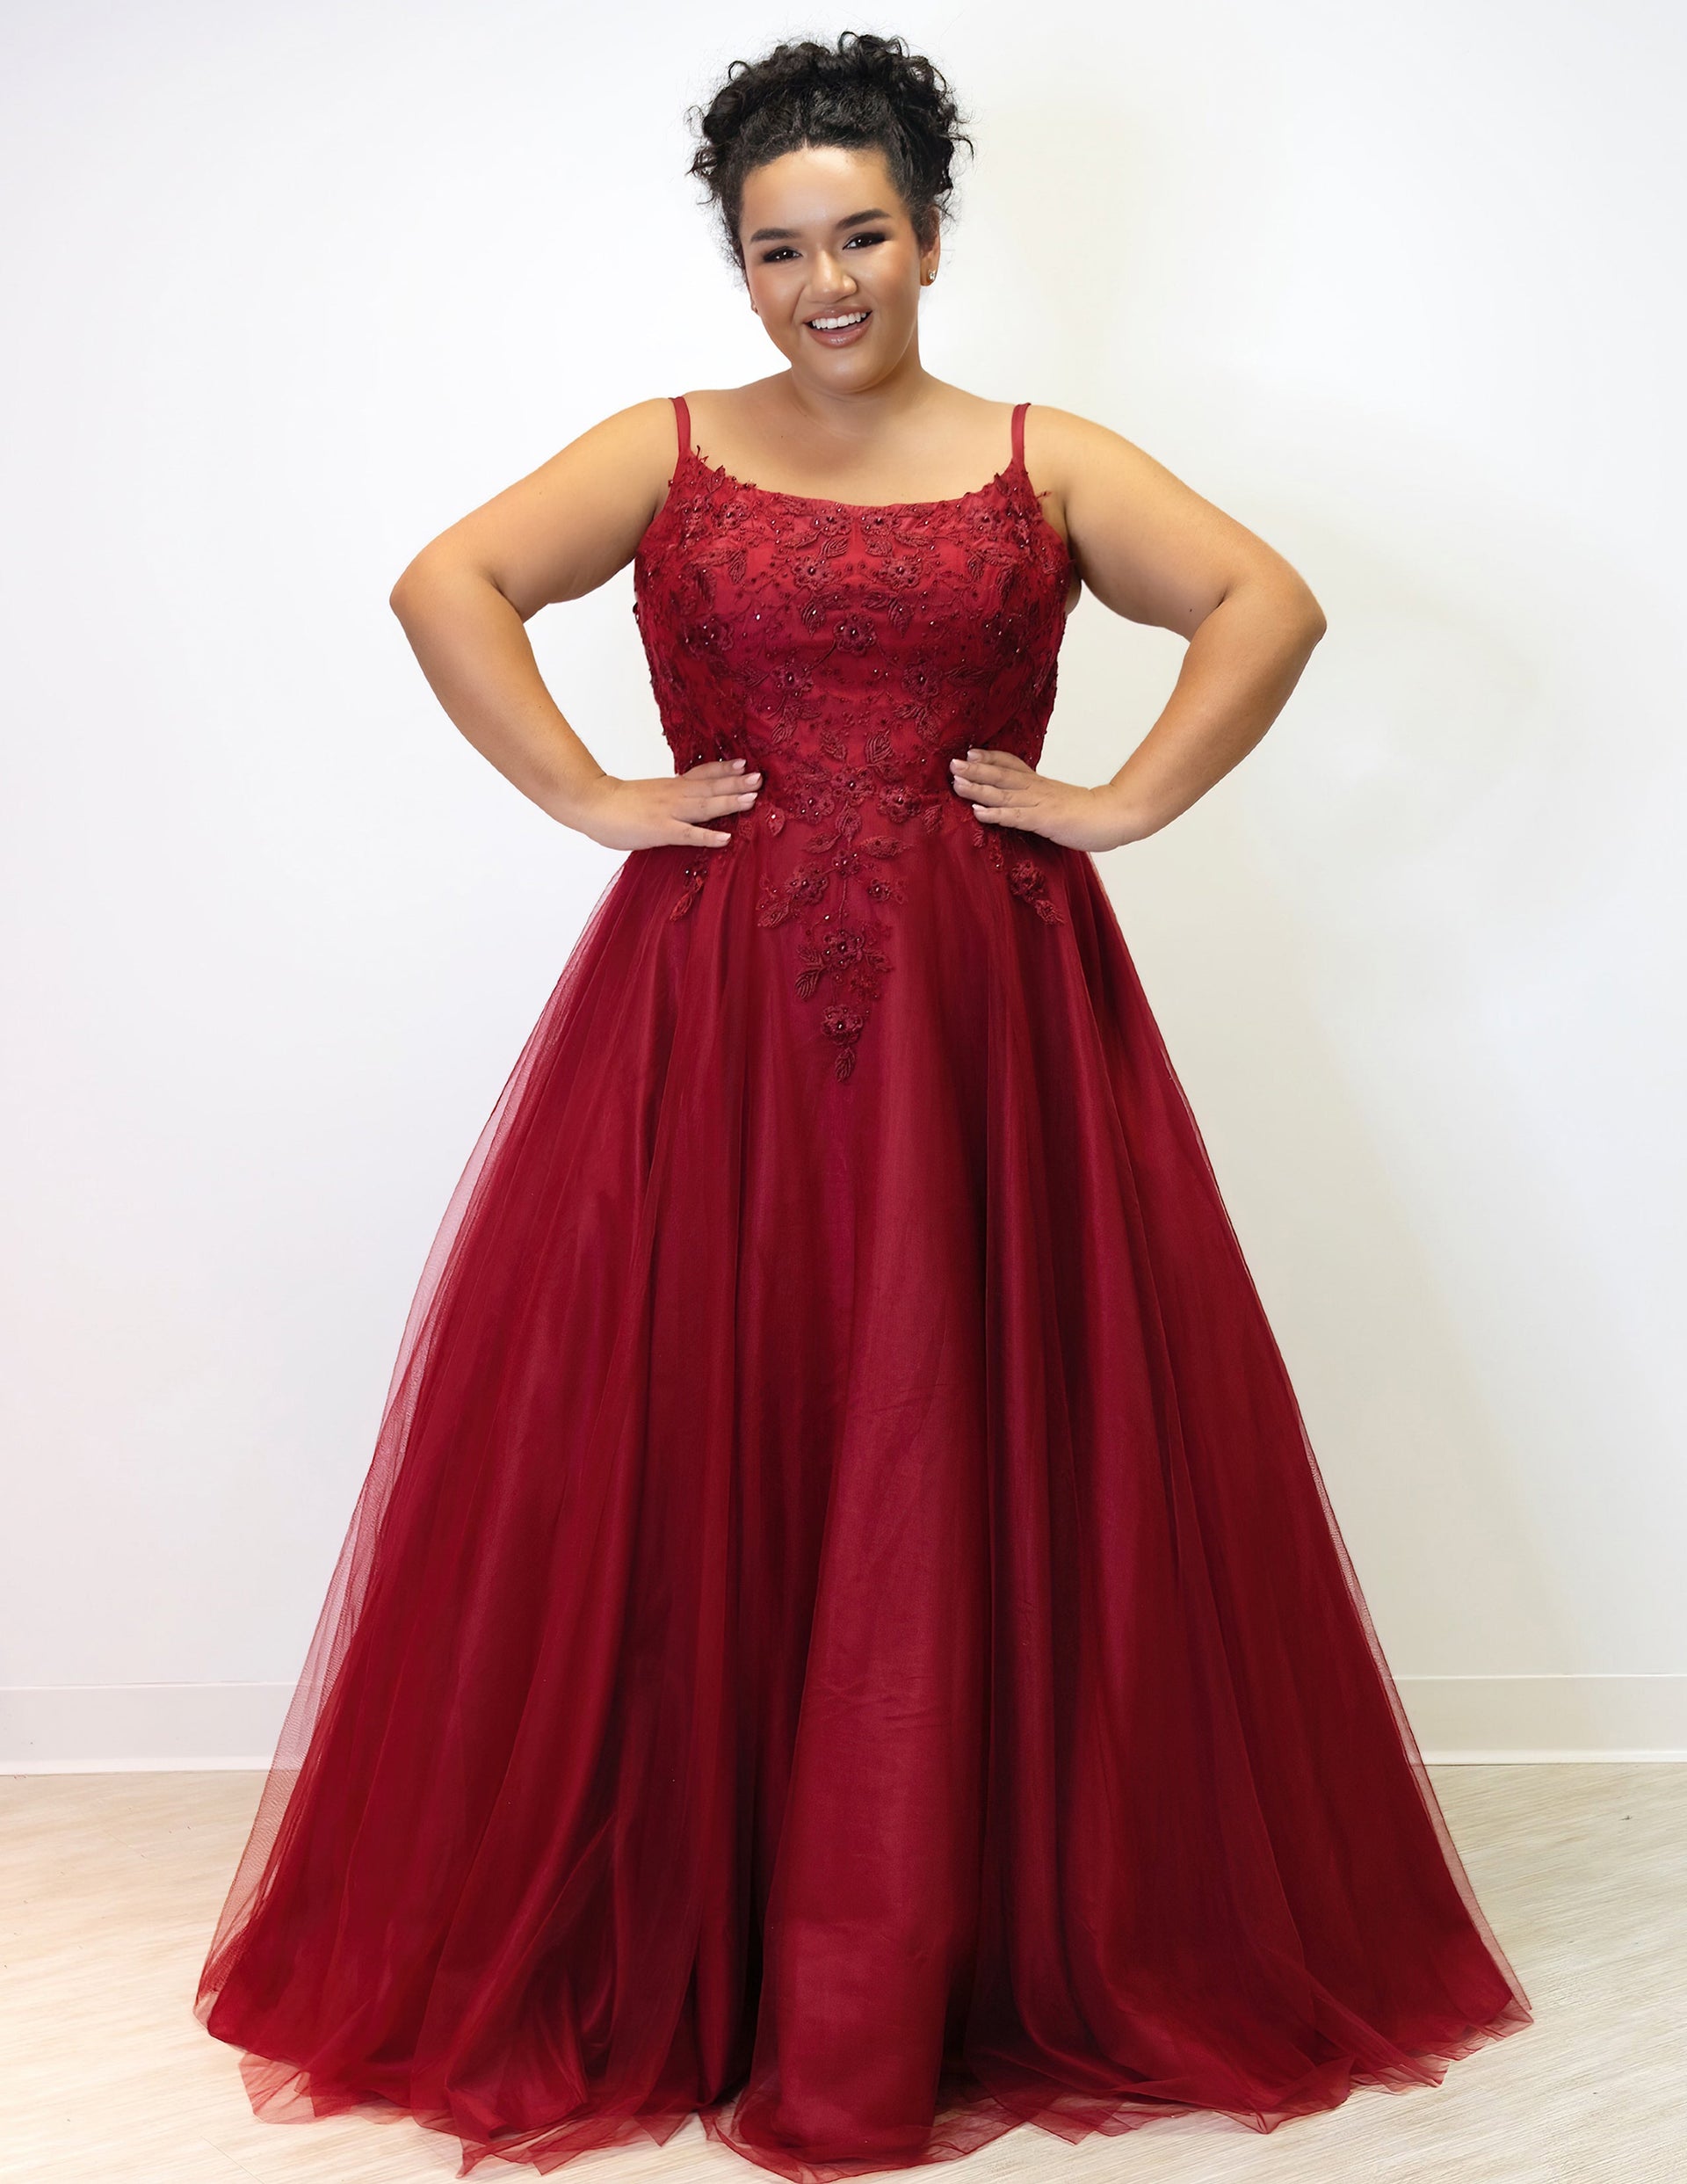 This week, Suzi from Fairview Pointe-Claire in Montreal talks about our  gorgeous prom dresses & invites you to stop by to find your dream dress.  👗